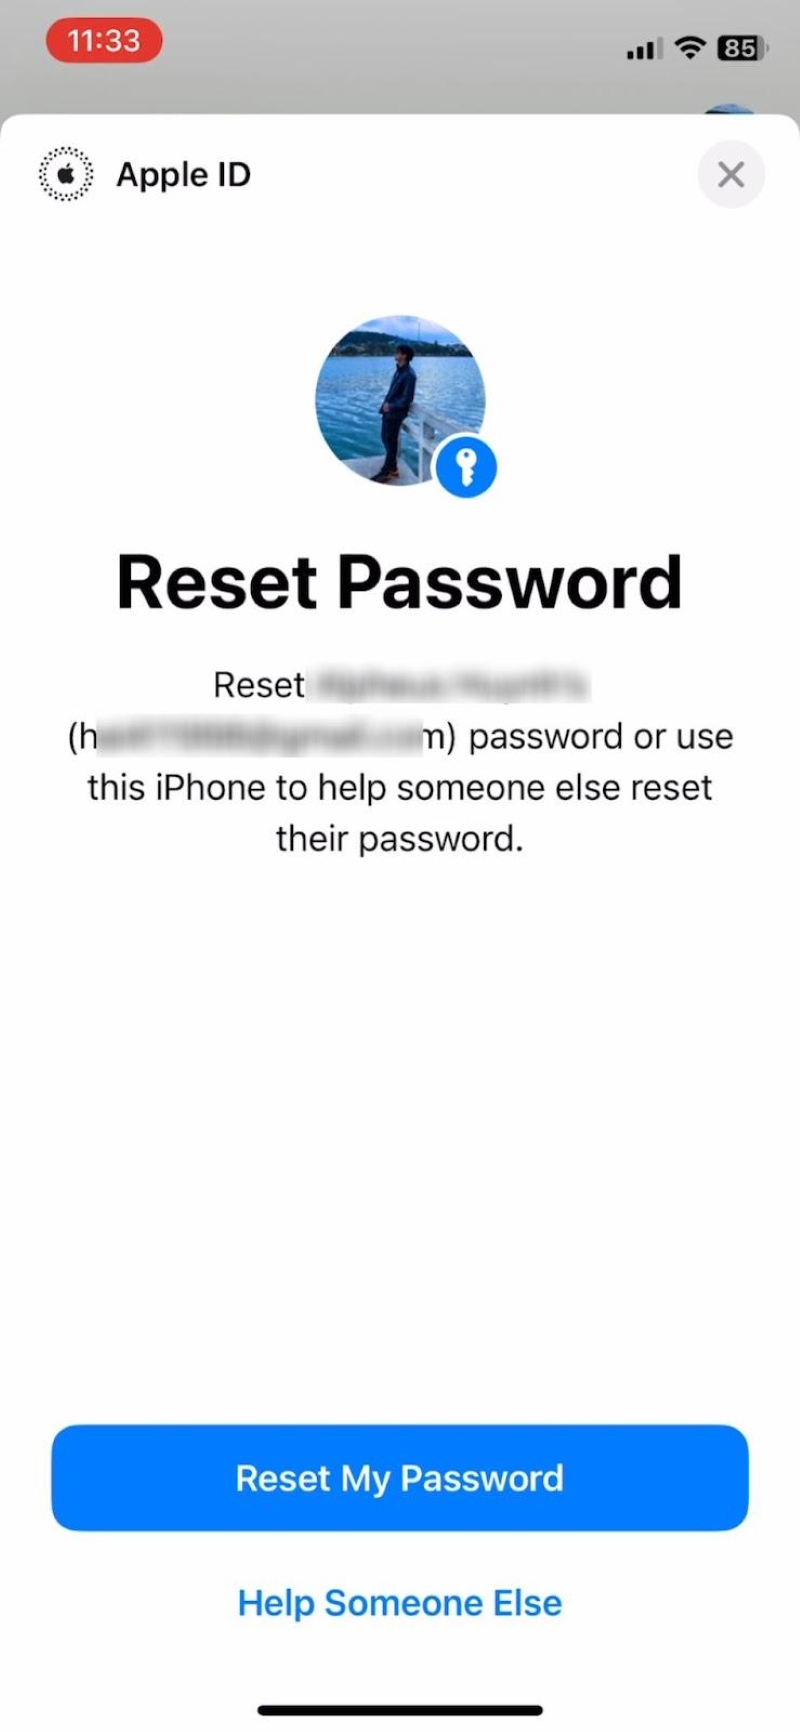 Reset My Password screen on the Apple Support app